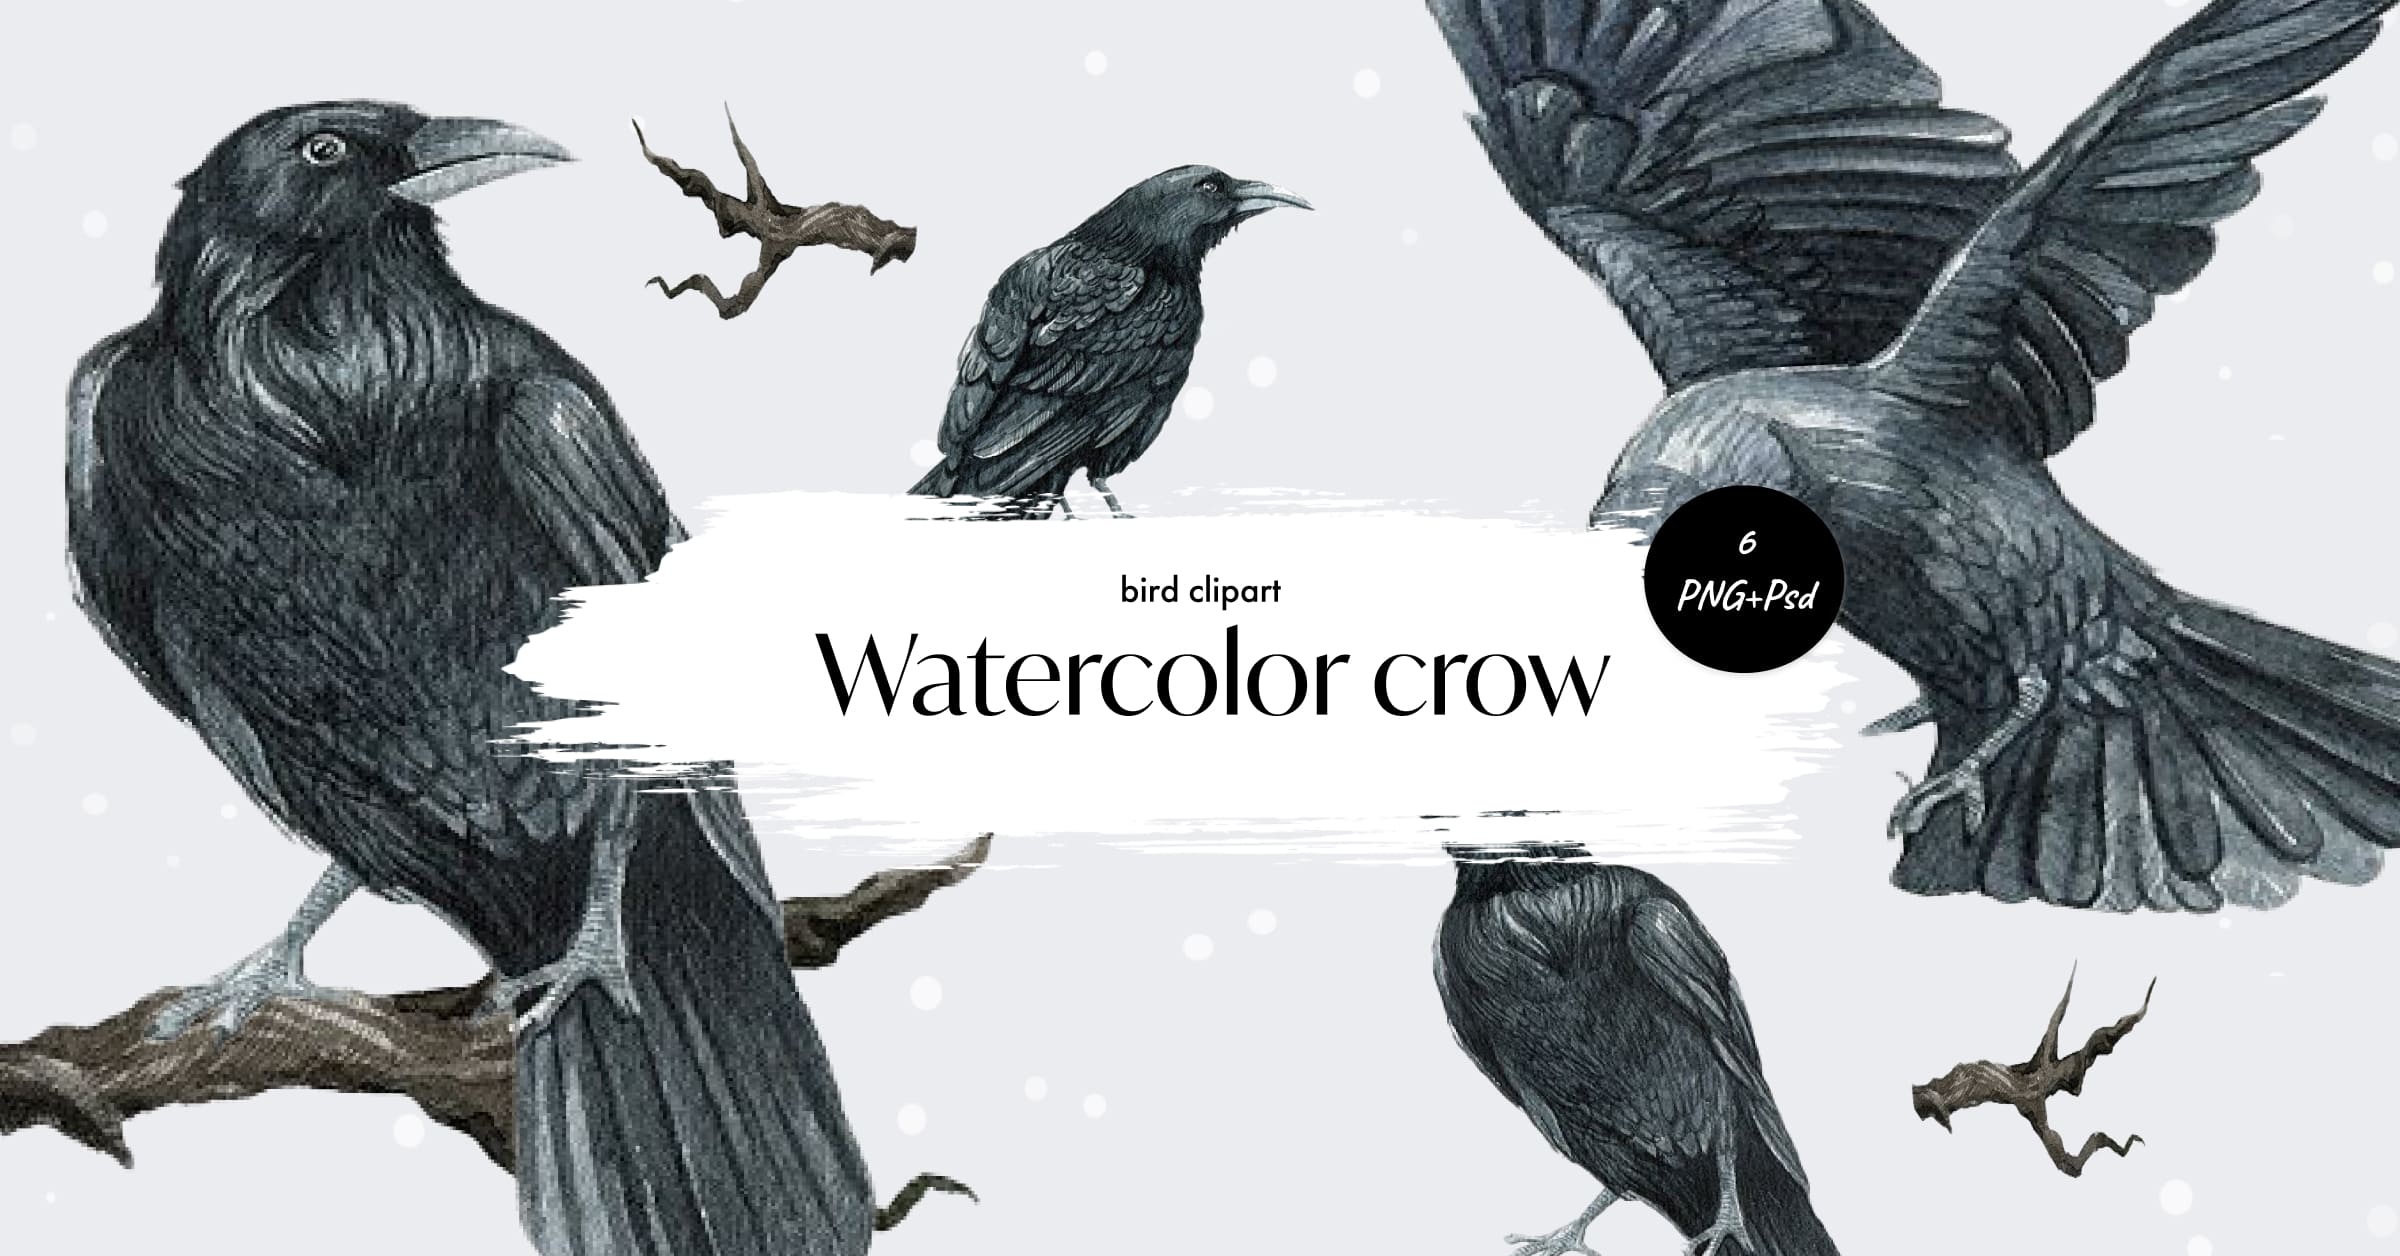 crow clipart drawing